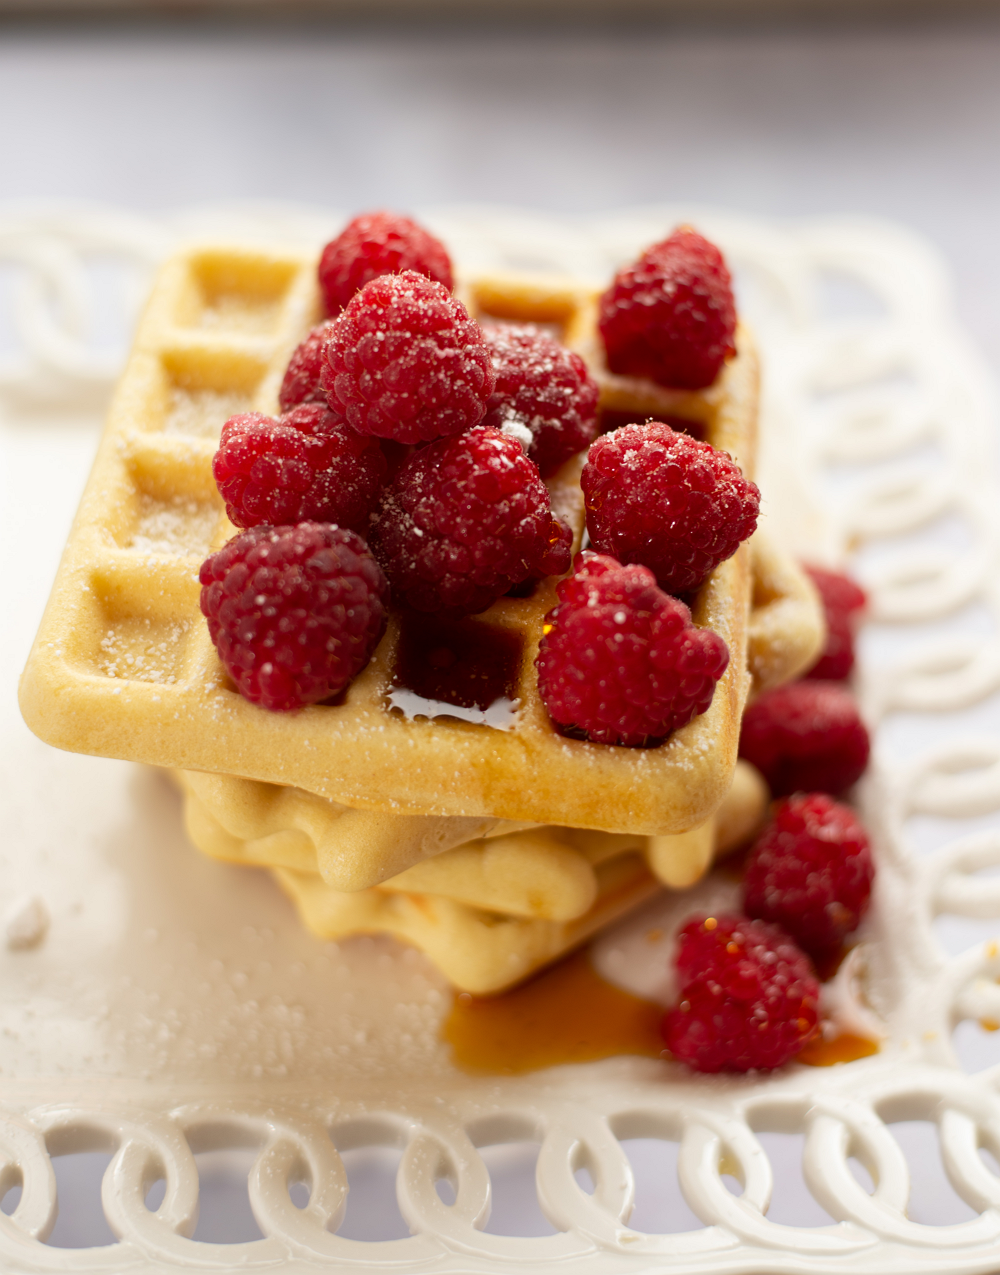 stack of gluten-free waffles covered in raspberries and syrup sitting on a white lacy plate